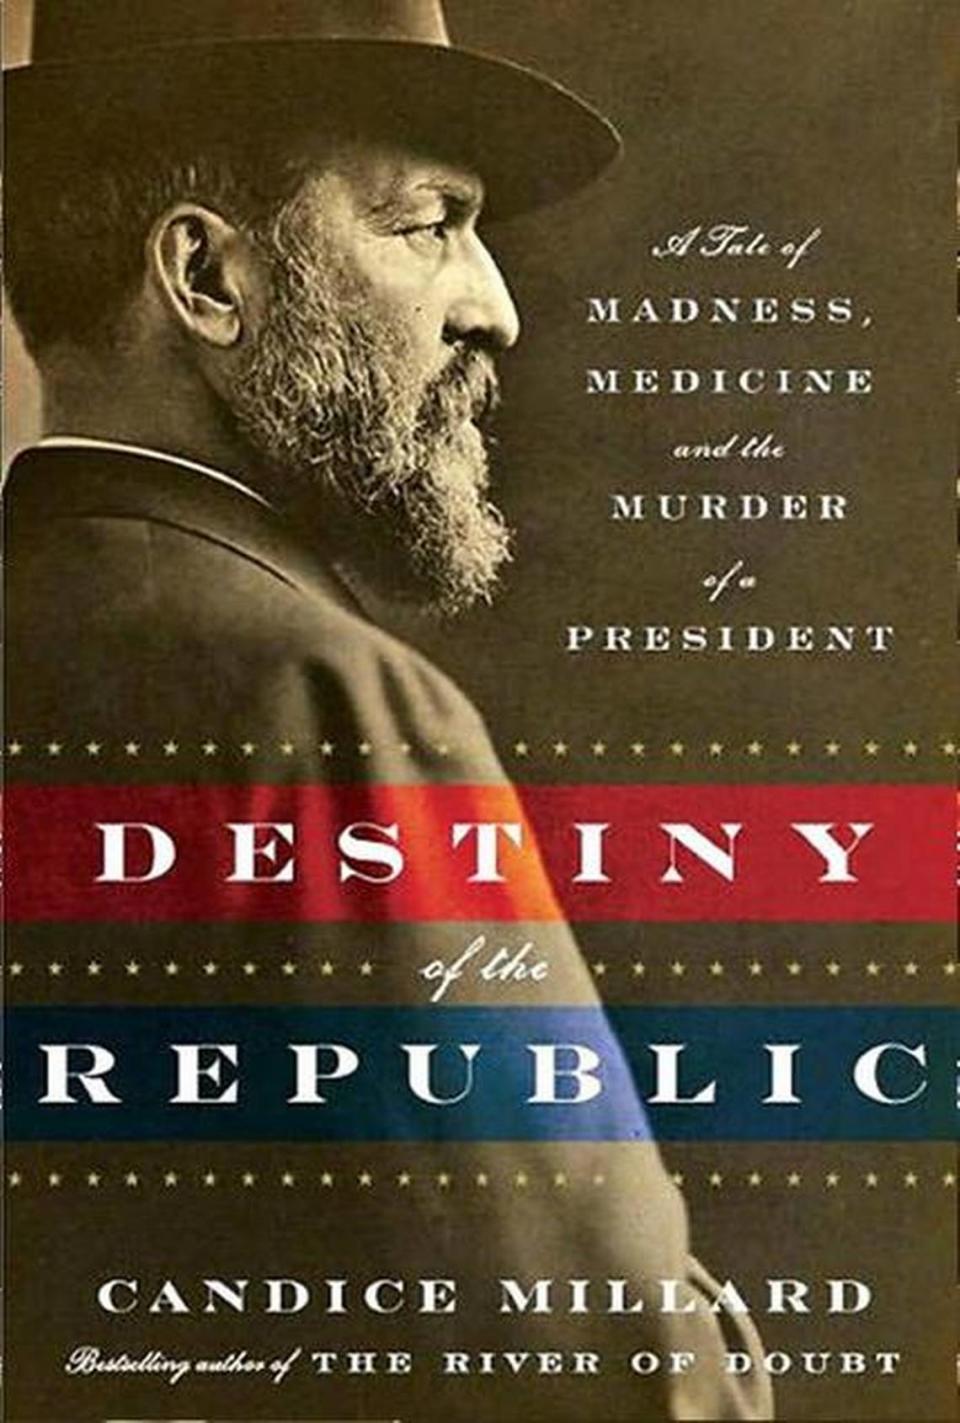 “Destiny of the Republic: A Tale of Madness, Medicine and the Murder of a President,” published 2011, was the second of Candice Millard’s four books.